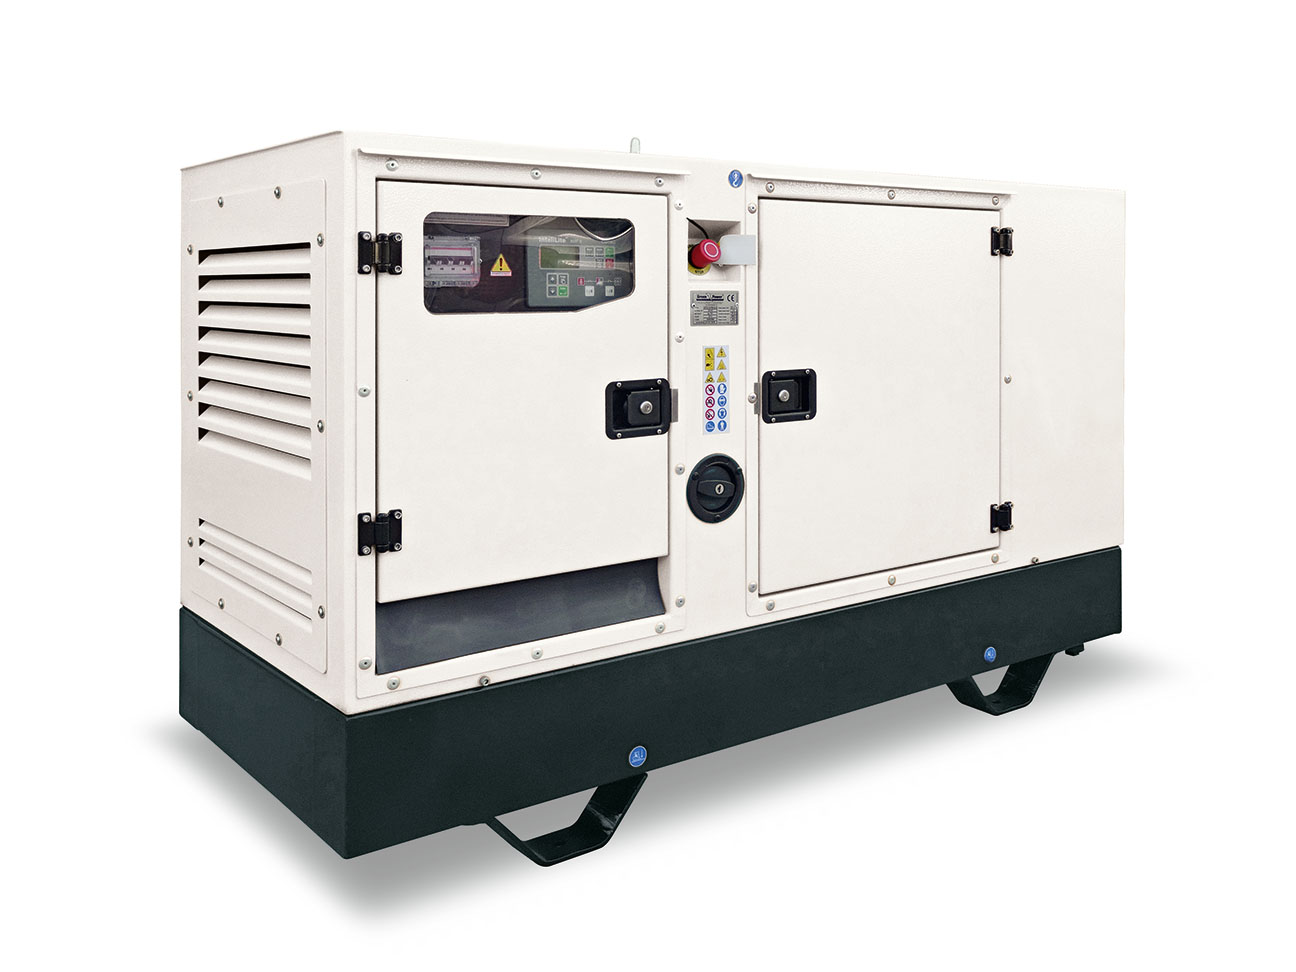 Baudouin 145KVA Generator by Ferbo Italy, model FE145 BSA, delivering robust power generation capabilities for a variety of applications